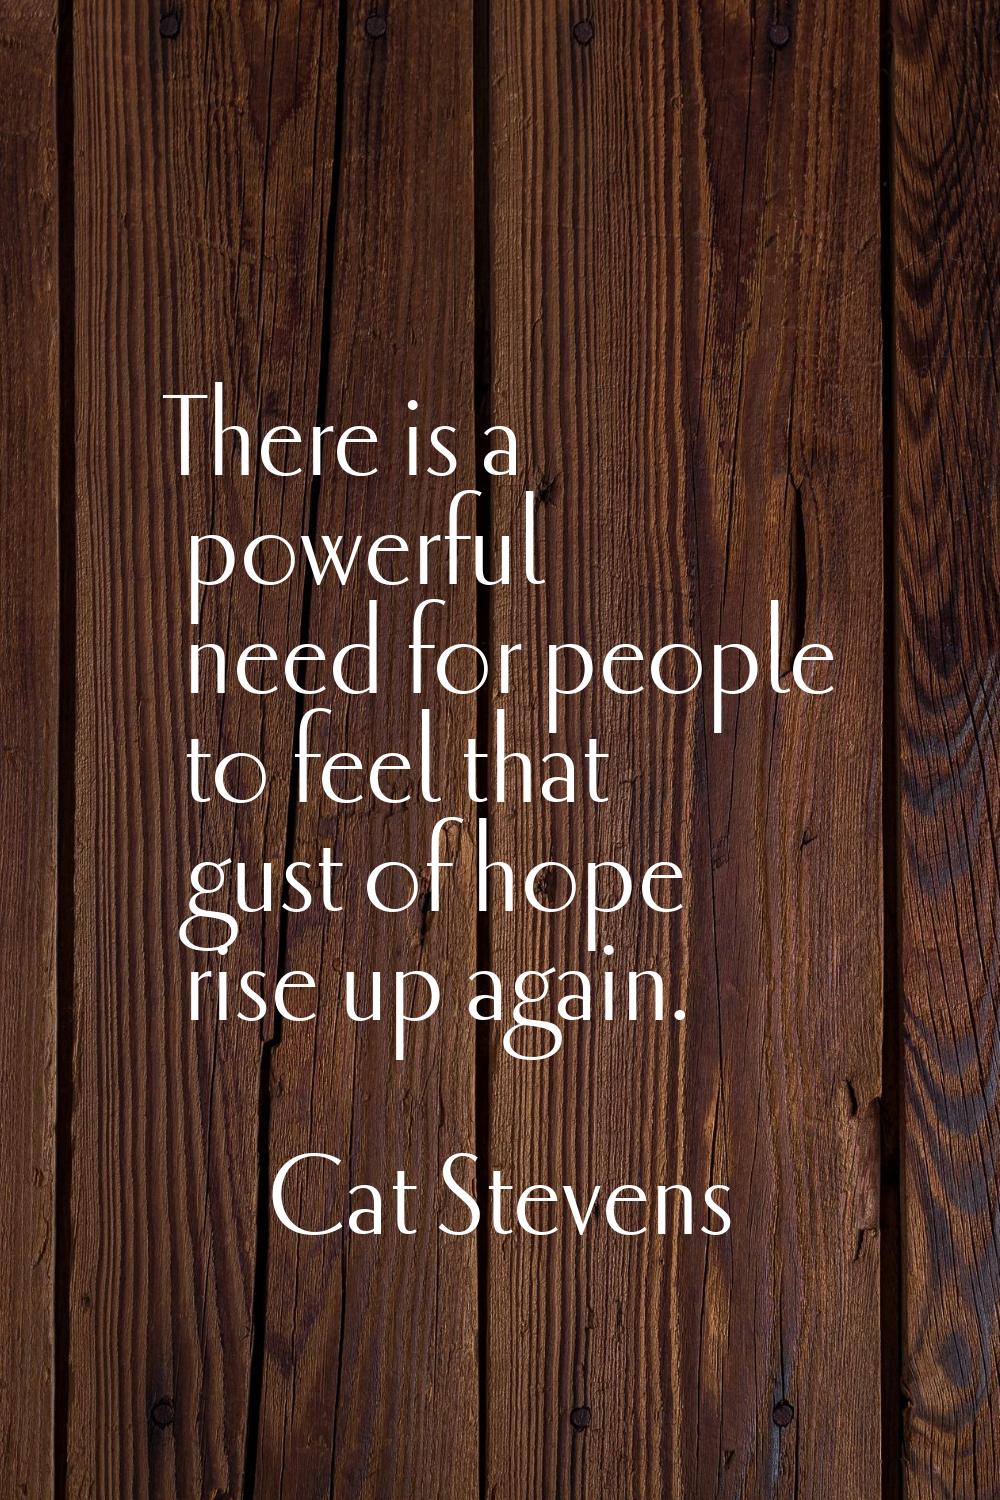 There is a powerful need for people to feel that gust of hope rise up again.